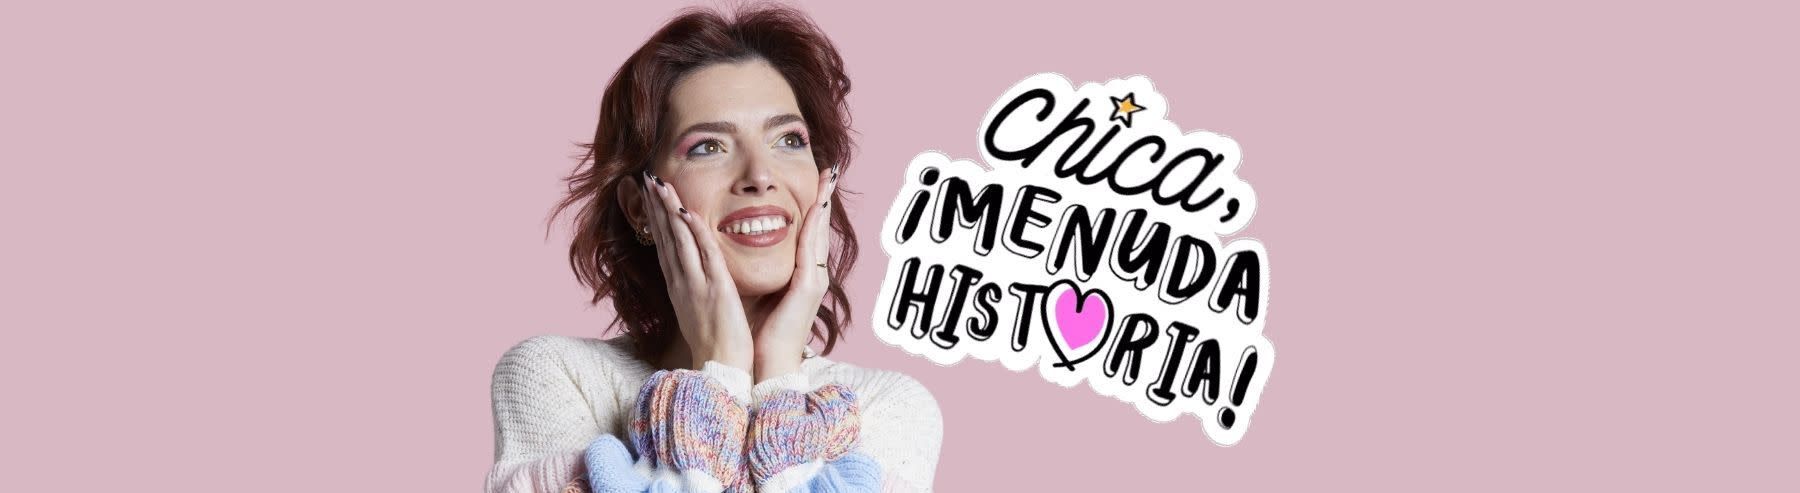 ¡Chica, menuda historia! is the new podcast of La Chica Bona where the host talks on special stories from historical women as Marie Curie, Rosa Parks and many others